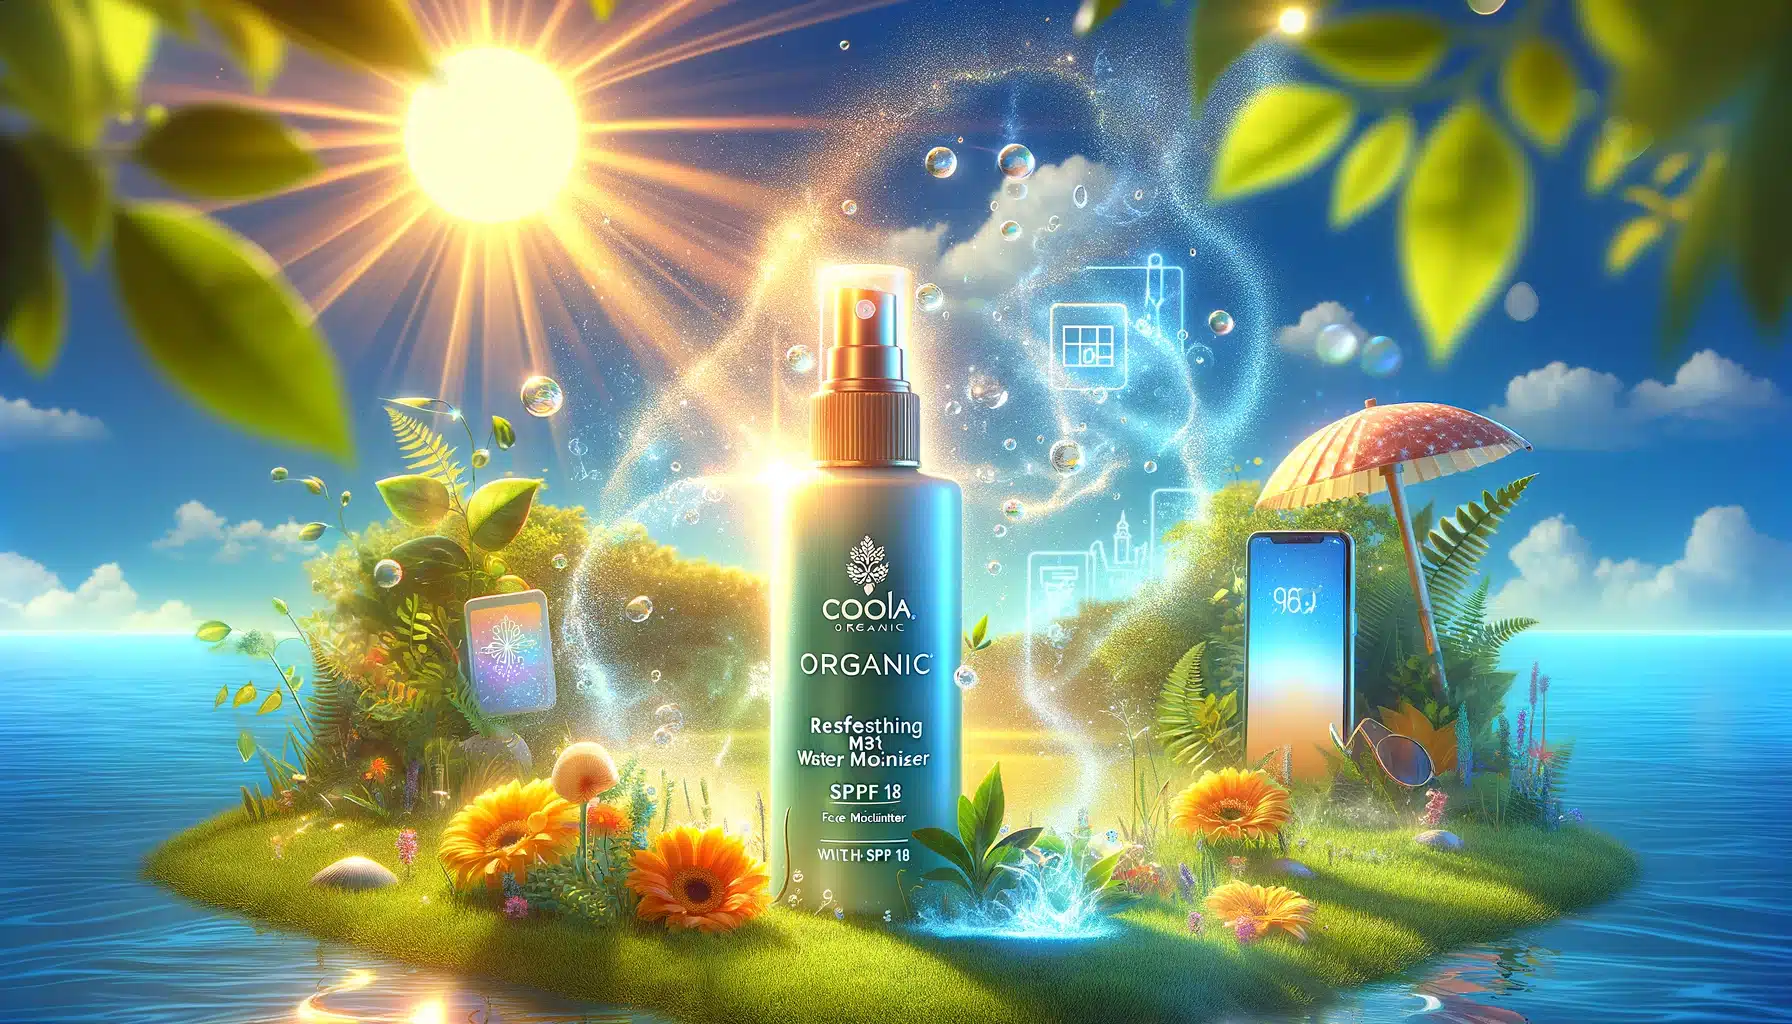 A vibrant and inviting image showcasing the COOLA Organic Refreshing Water Mist Face Moisturizer With SPF 18 in a serene sunny outdoor setting emphasizing its dual protection against the sun and digital screen